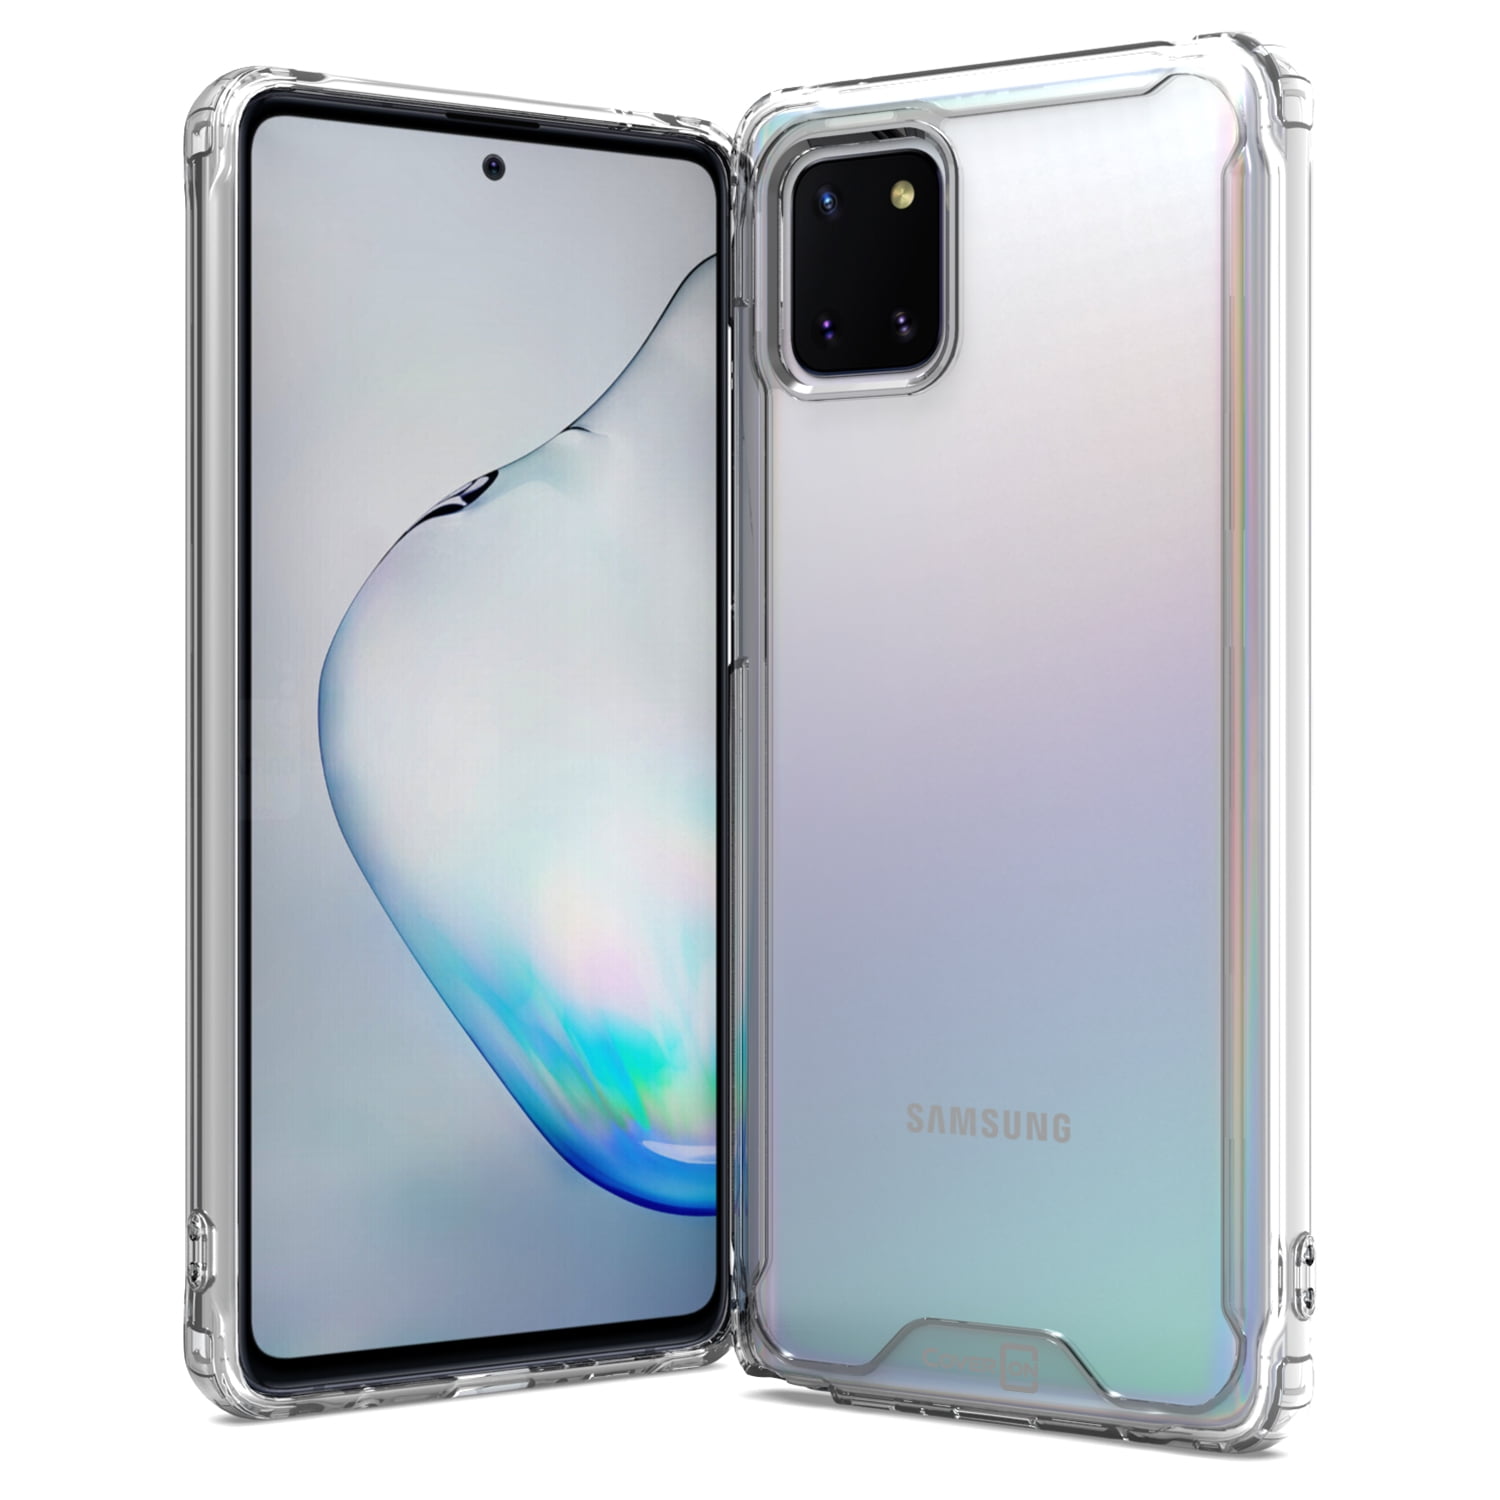 Самсунг 81. Самсунг галакси ноут 10 Лайт. Samsung Note 10 Clear Case. Samsung mi Note 10 Lite. Galaxy Note 10 Plus.